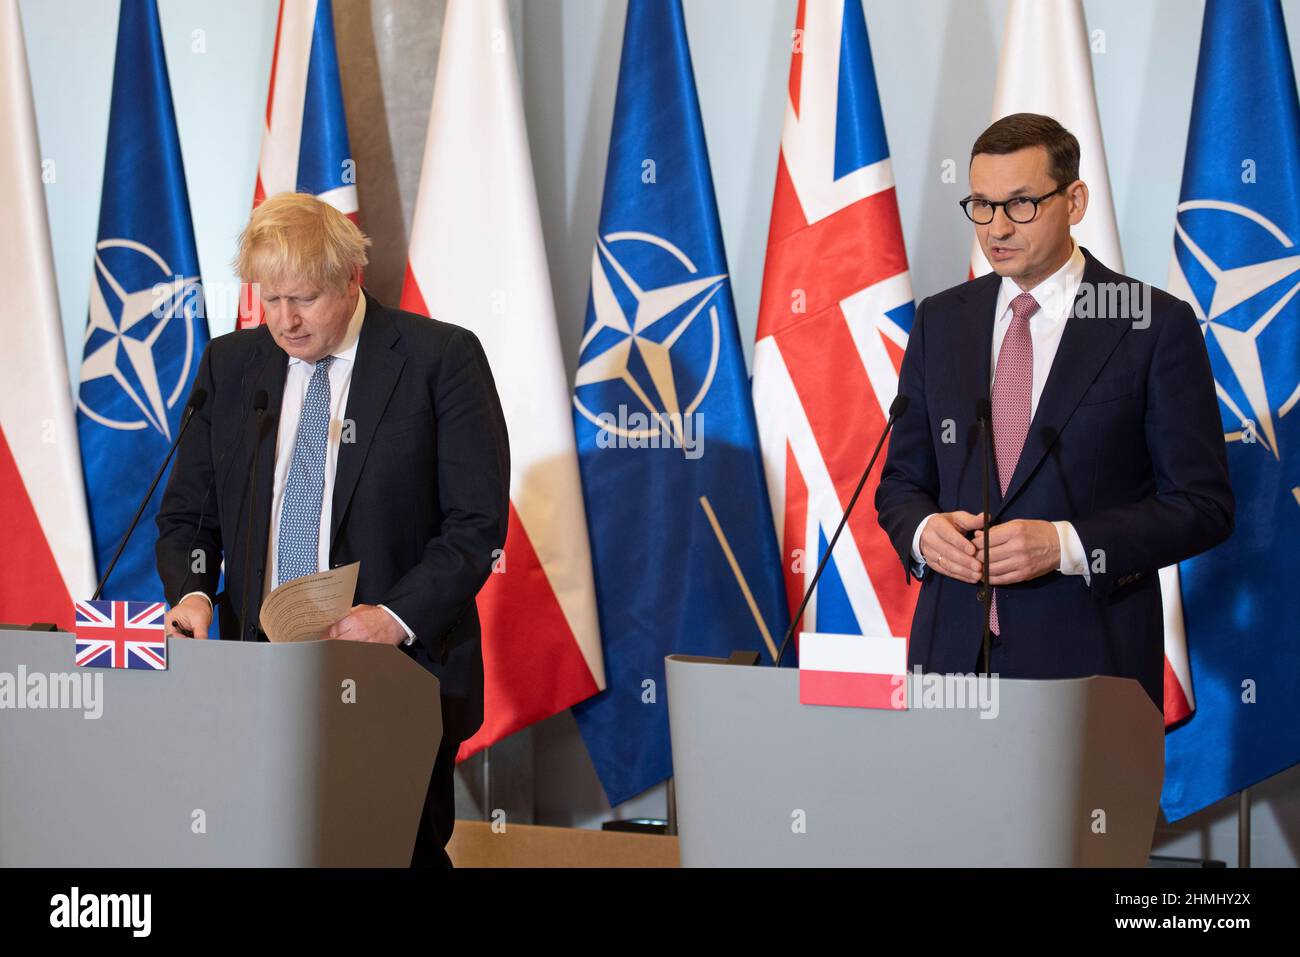 Warsaw, Warsaw, Poland. 10th Feb, 2022. Polish Prime Minister MATEUSZ MORAWIECKI (R) and British Prime Minister BORIS JOHNSON (L) give a press conference during a meeting held in the chancellery of the Prime Minister of Poland on February 10, 2022 in Warsaw, Poland. The British Prime Minister Borish Johnson met Polish Prime Minister Mateusz Morawiecki to discuss about security in eastern Europe and Russian military build up on the border with Ukraine. Credit: ZUMA Press, Inc./Alamy Live News Stock Photo